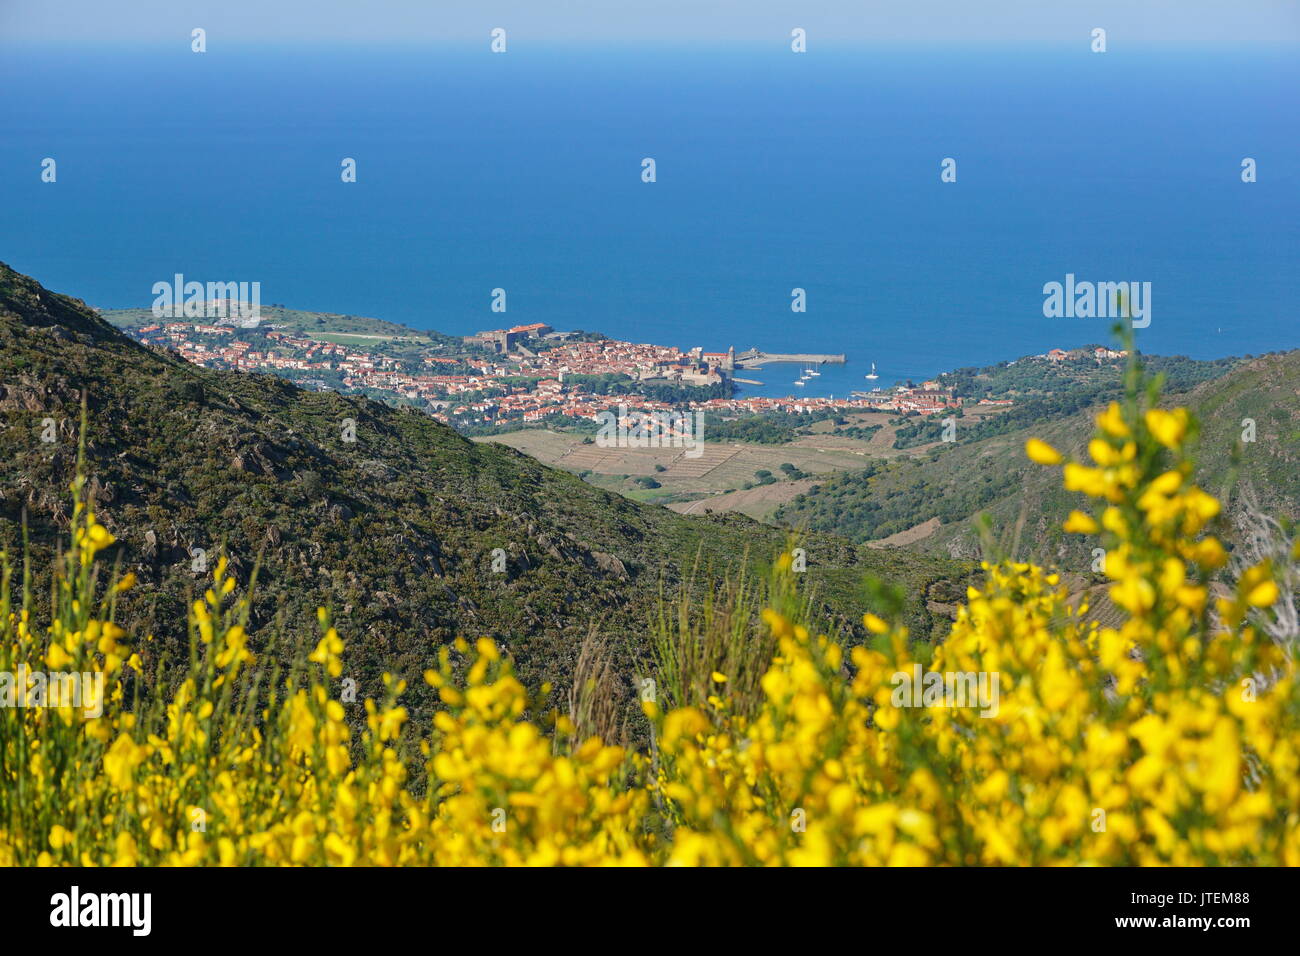 Coastal village landscape Collioure on the shore of the Mediterranean sea, seen from the heights, Vermilion coast, France, Roussillon Stock Photo